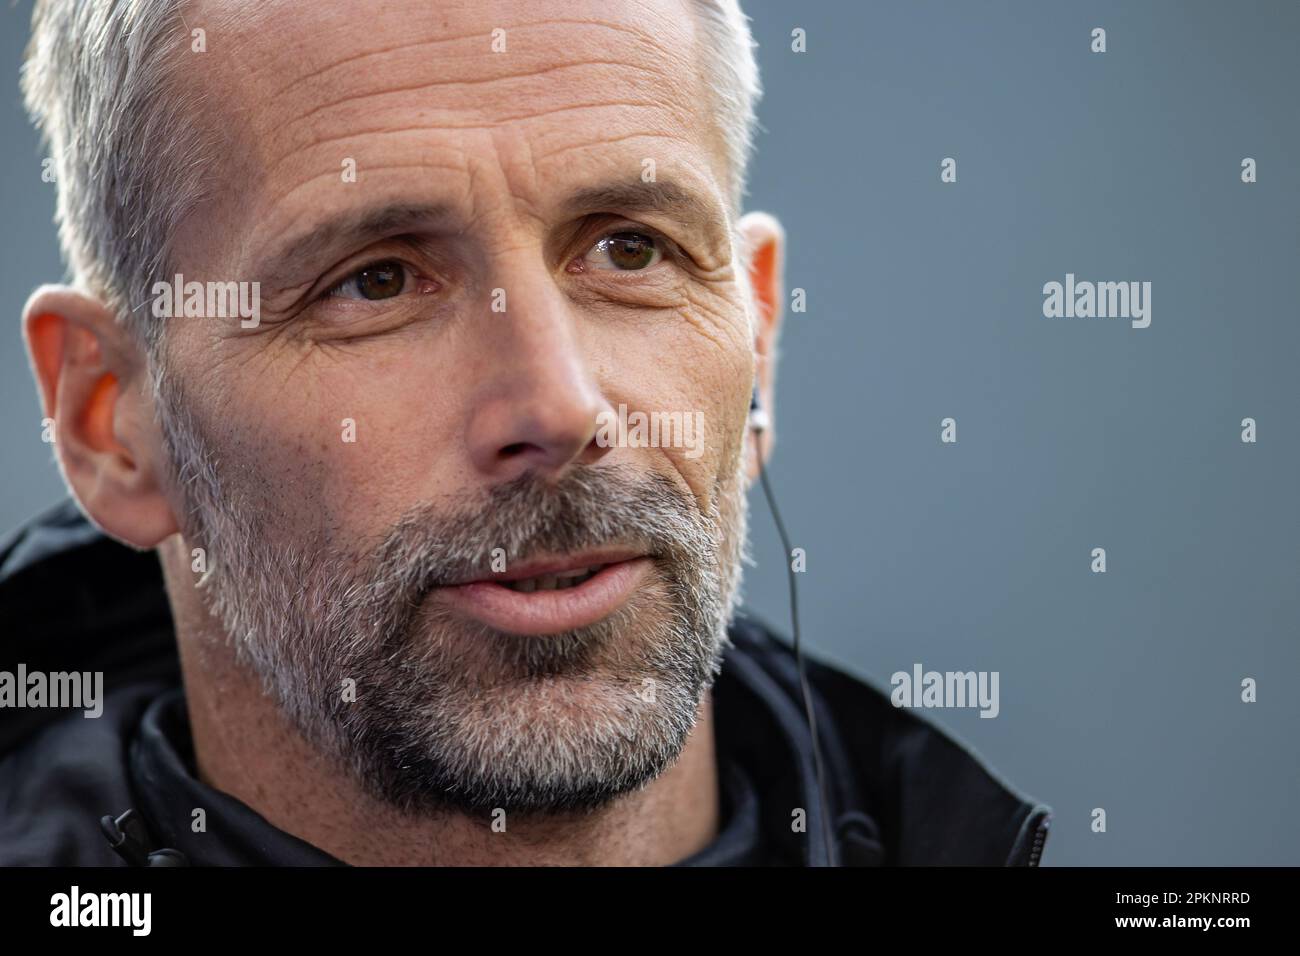 Berlin, Germany. 08th Apr, 2023. Soccer: Bundesliga, Hertha BSC - RB  Leipzig, Matchday 27, Olympiastadion. RB Leipzig coach Marco Rose smiles  before the start of the game. Credit: Andreas Gora/dpa - IMPORTANT